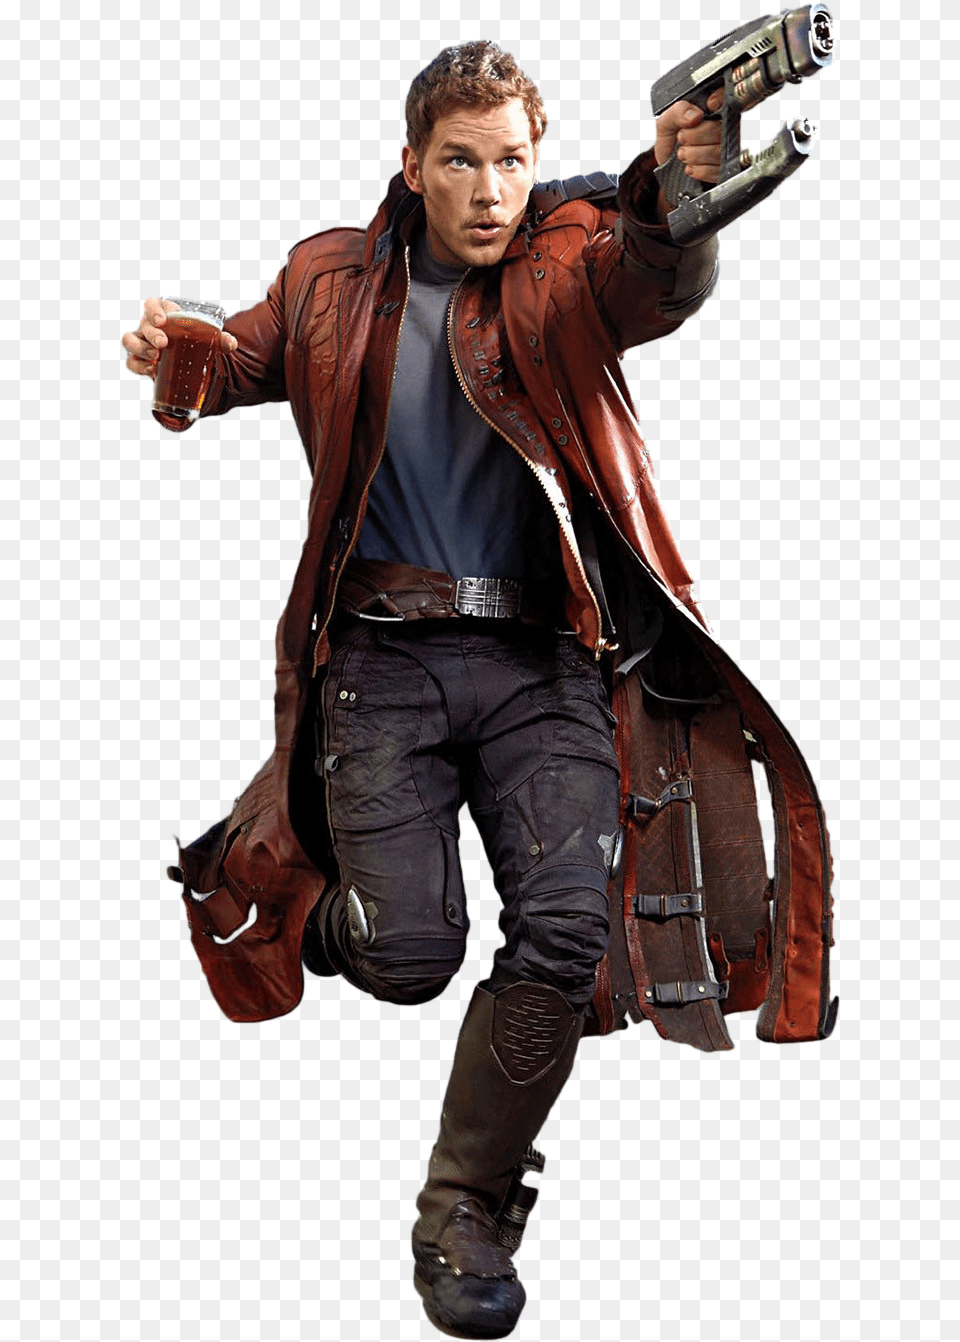 Download Cutout Star Lord Cut Out Full Size Star Lord, Weapon, Jacket, Handgun, Gun Png Image